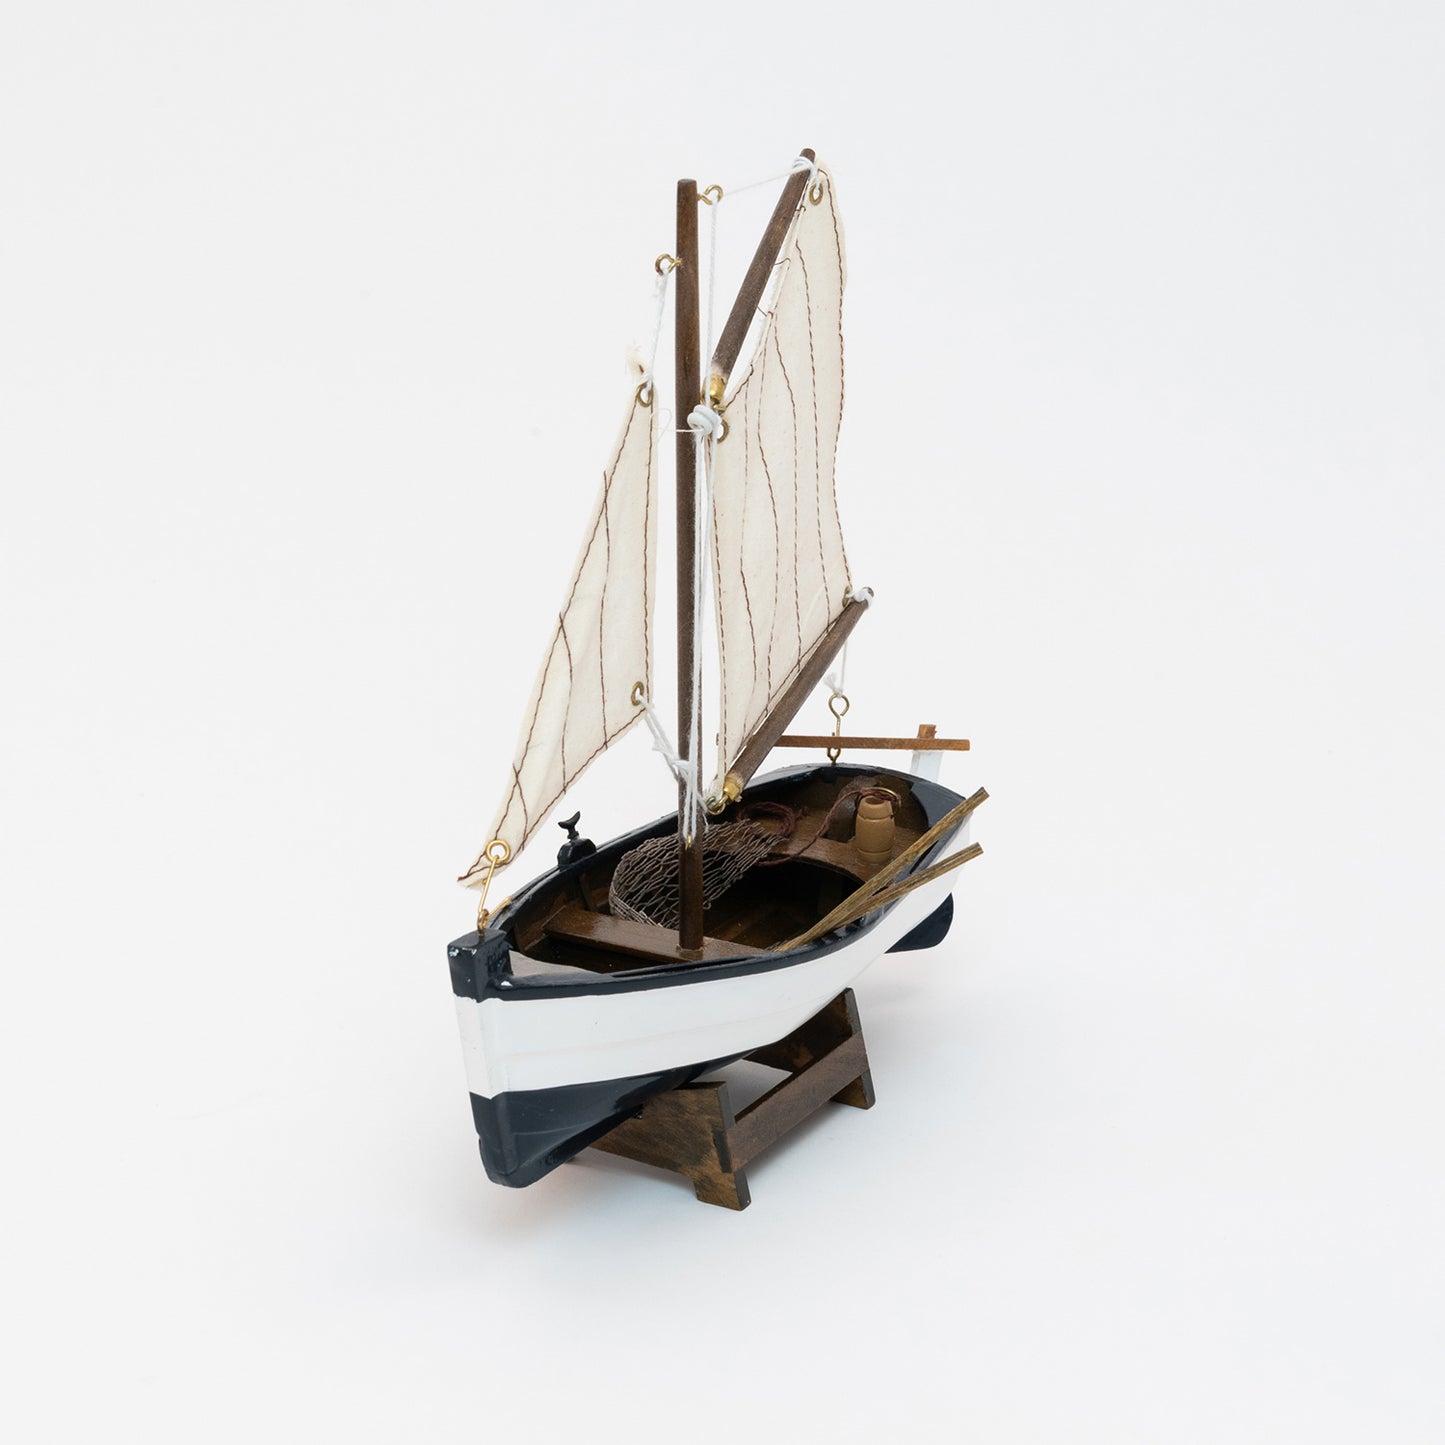 Front view of the model sailing boat with a navy blue and white hull and cream sails.